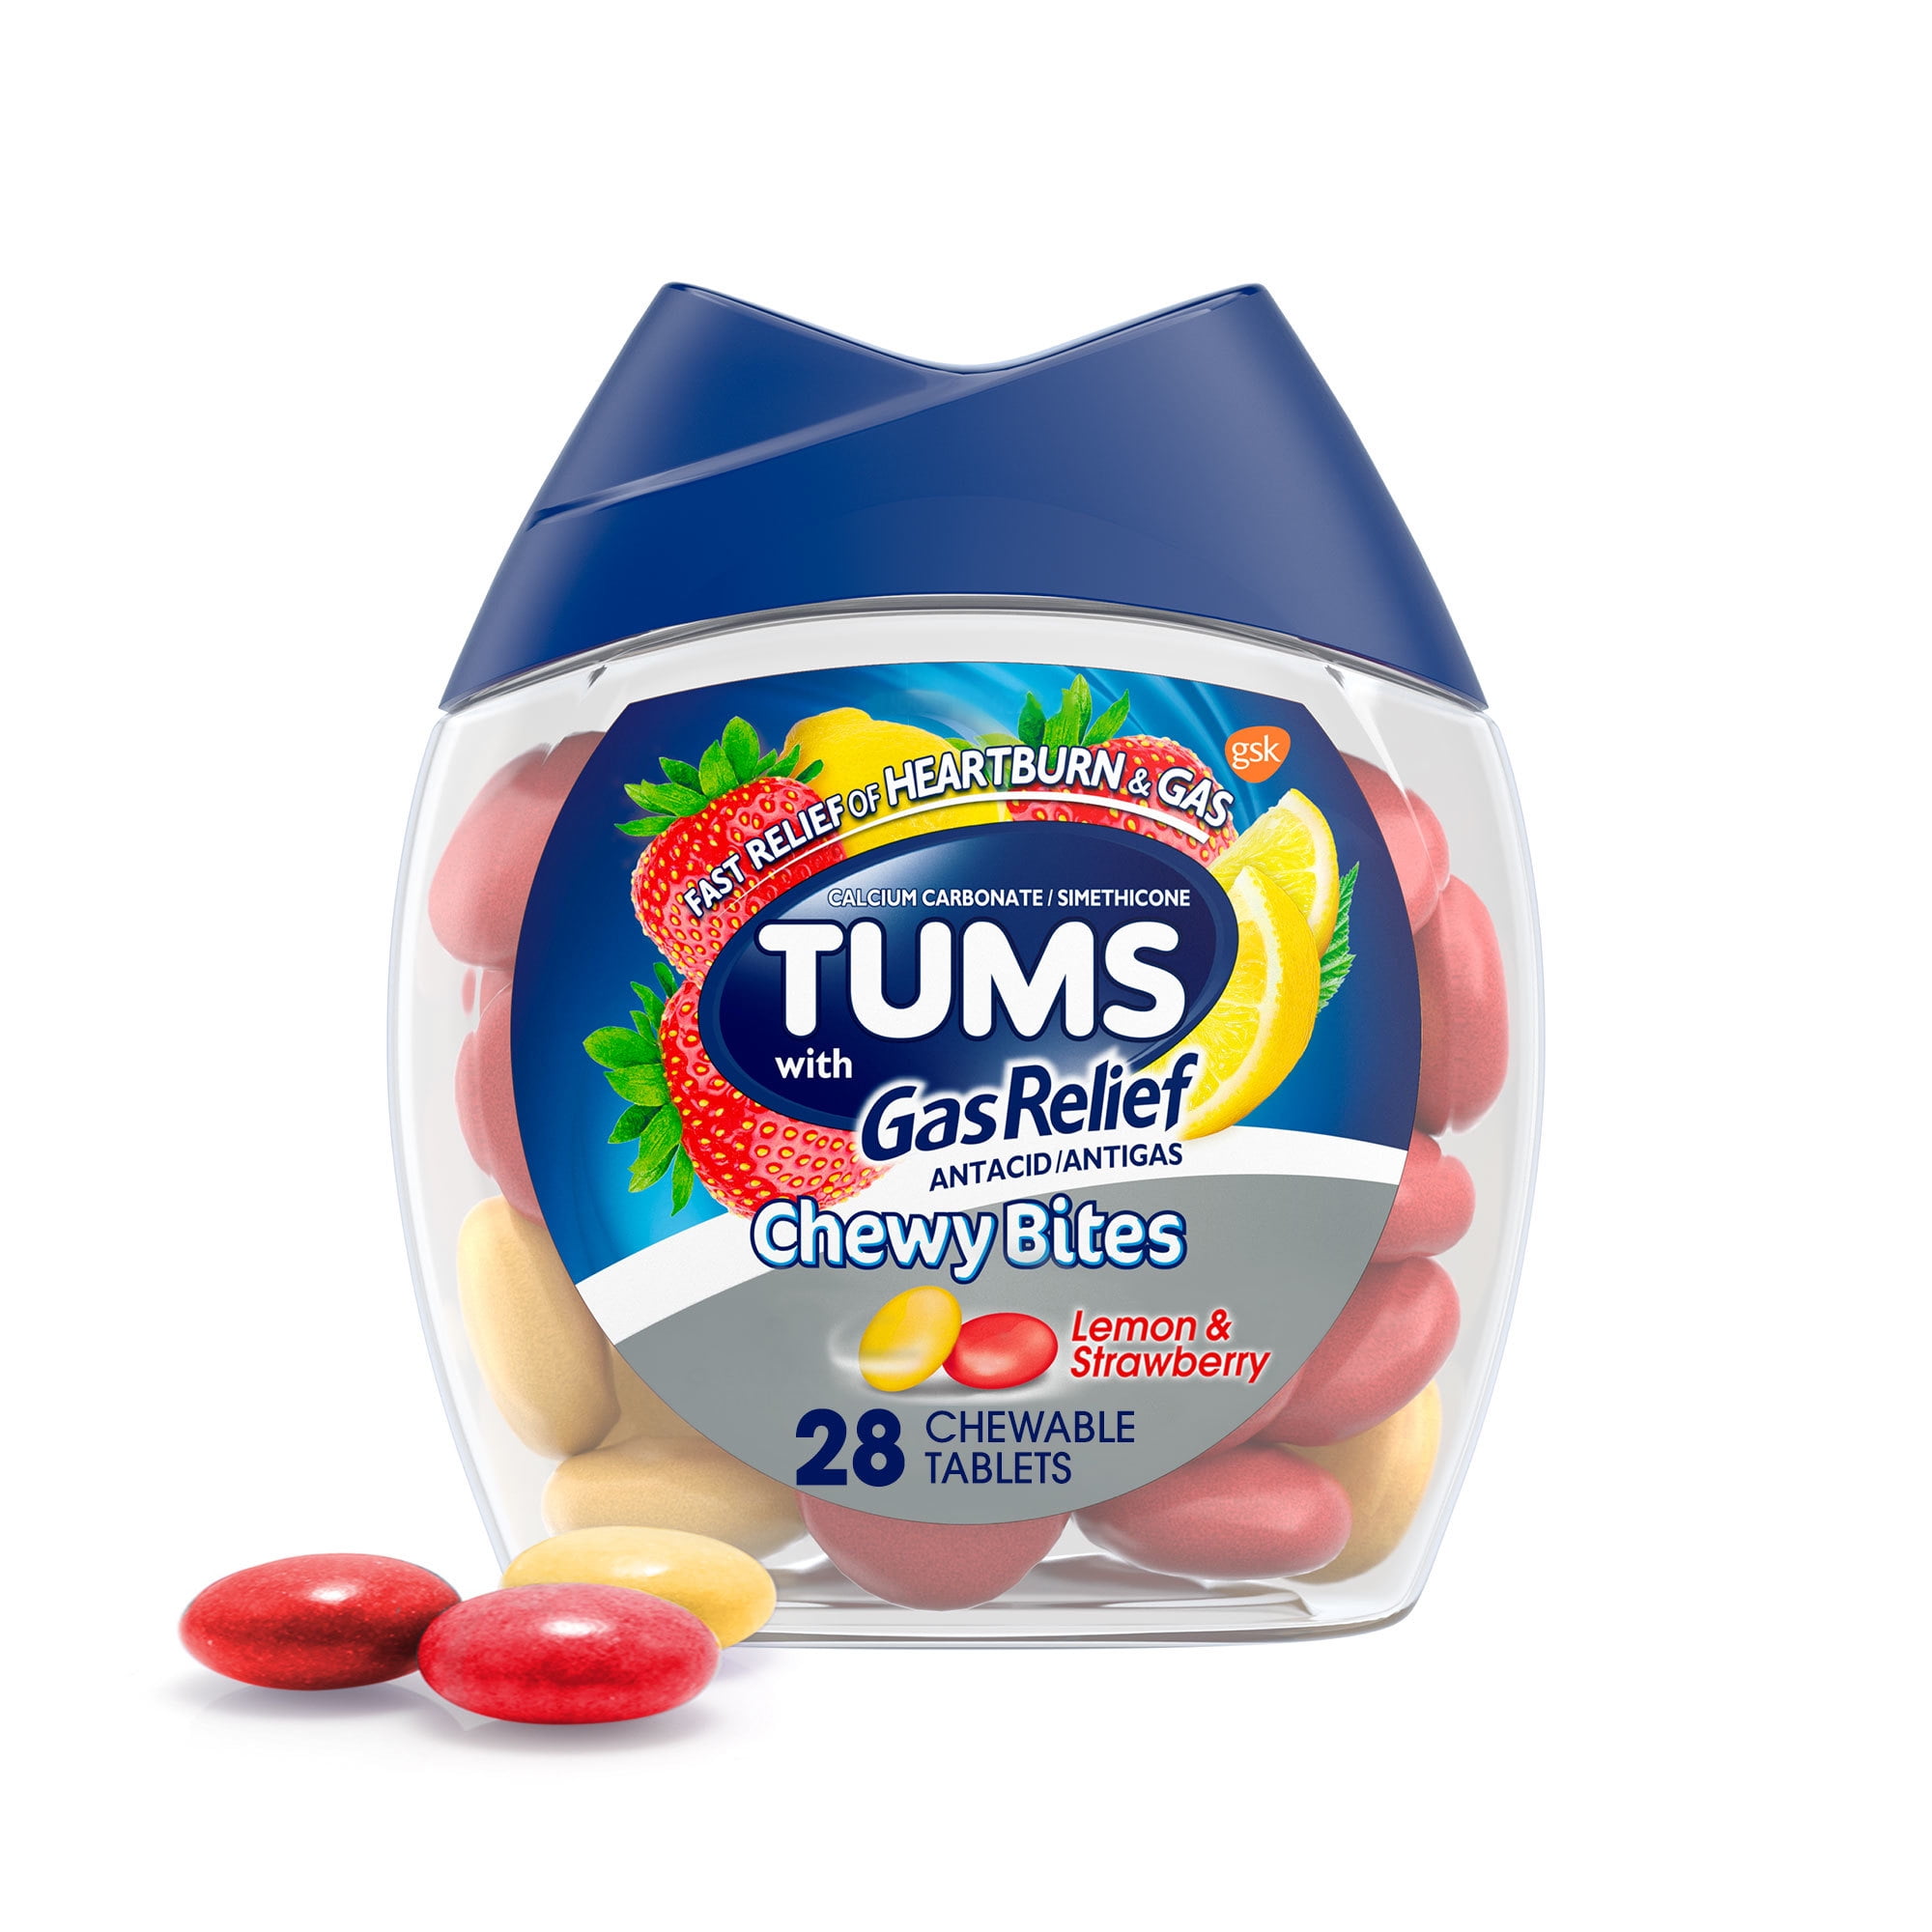 Tums Chewy Bites for Gas Relief, Antacid for Gas, Lemon Strawberry, 28 Ct